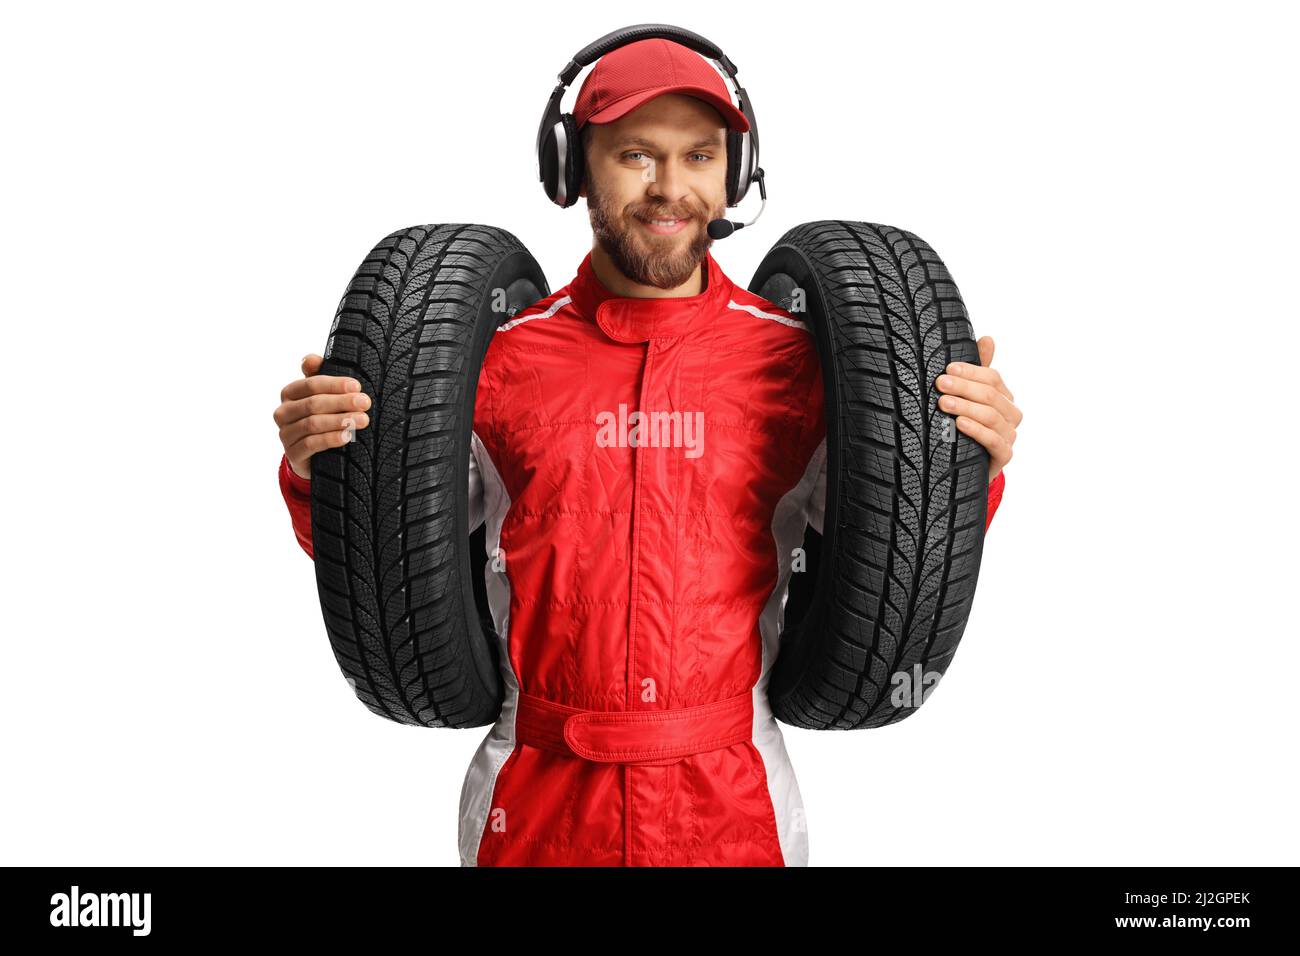 Race team member holding car tires isolated on white background Stock Photo